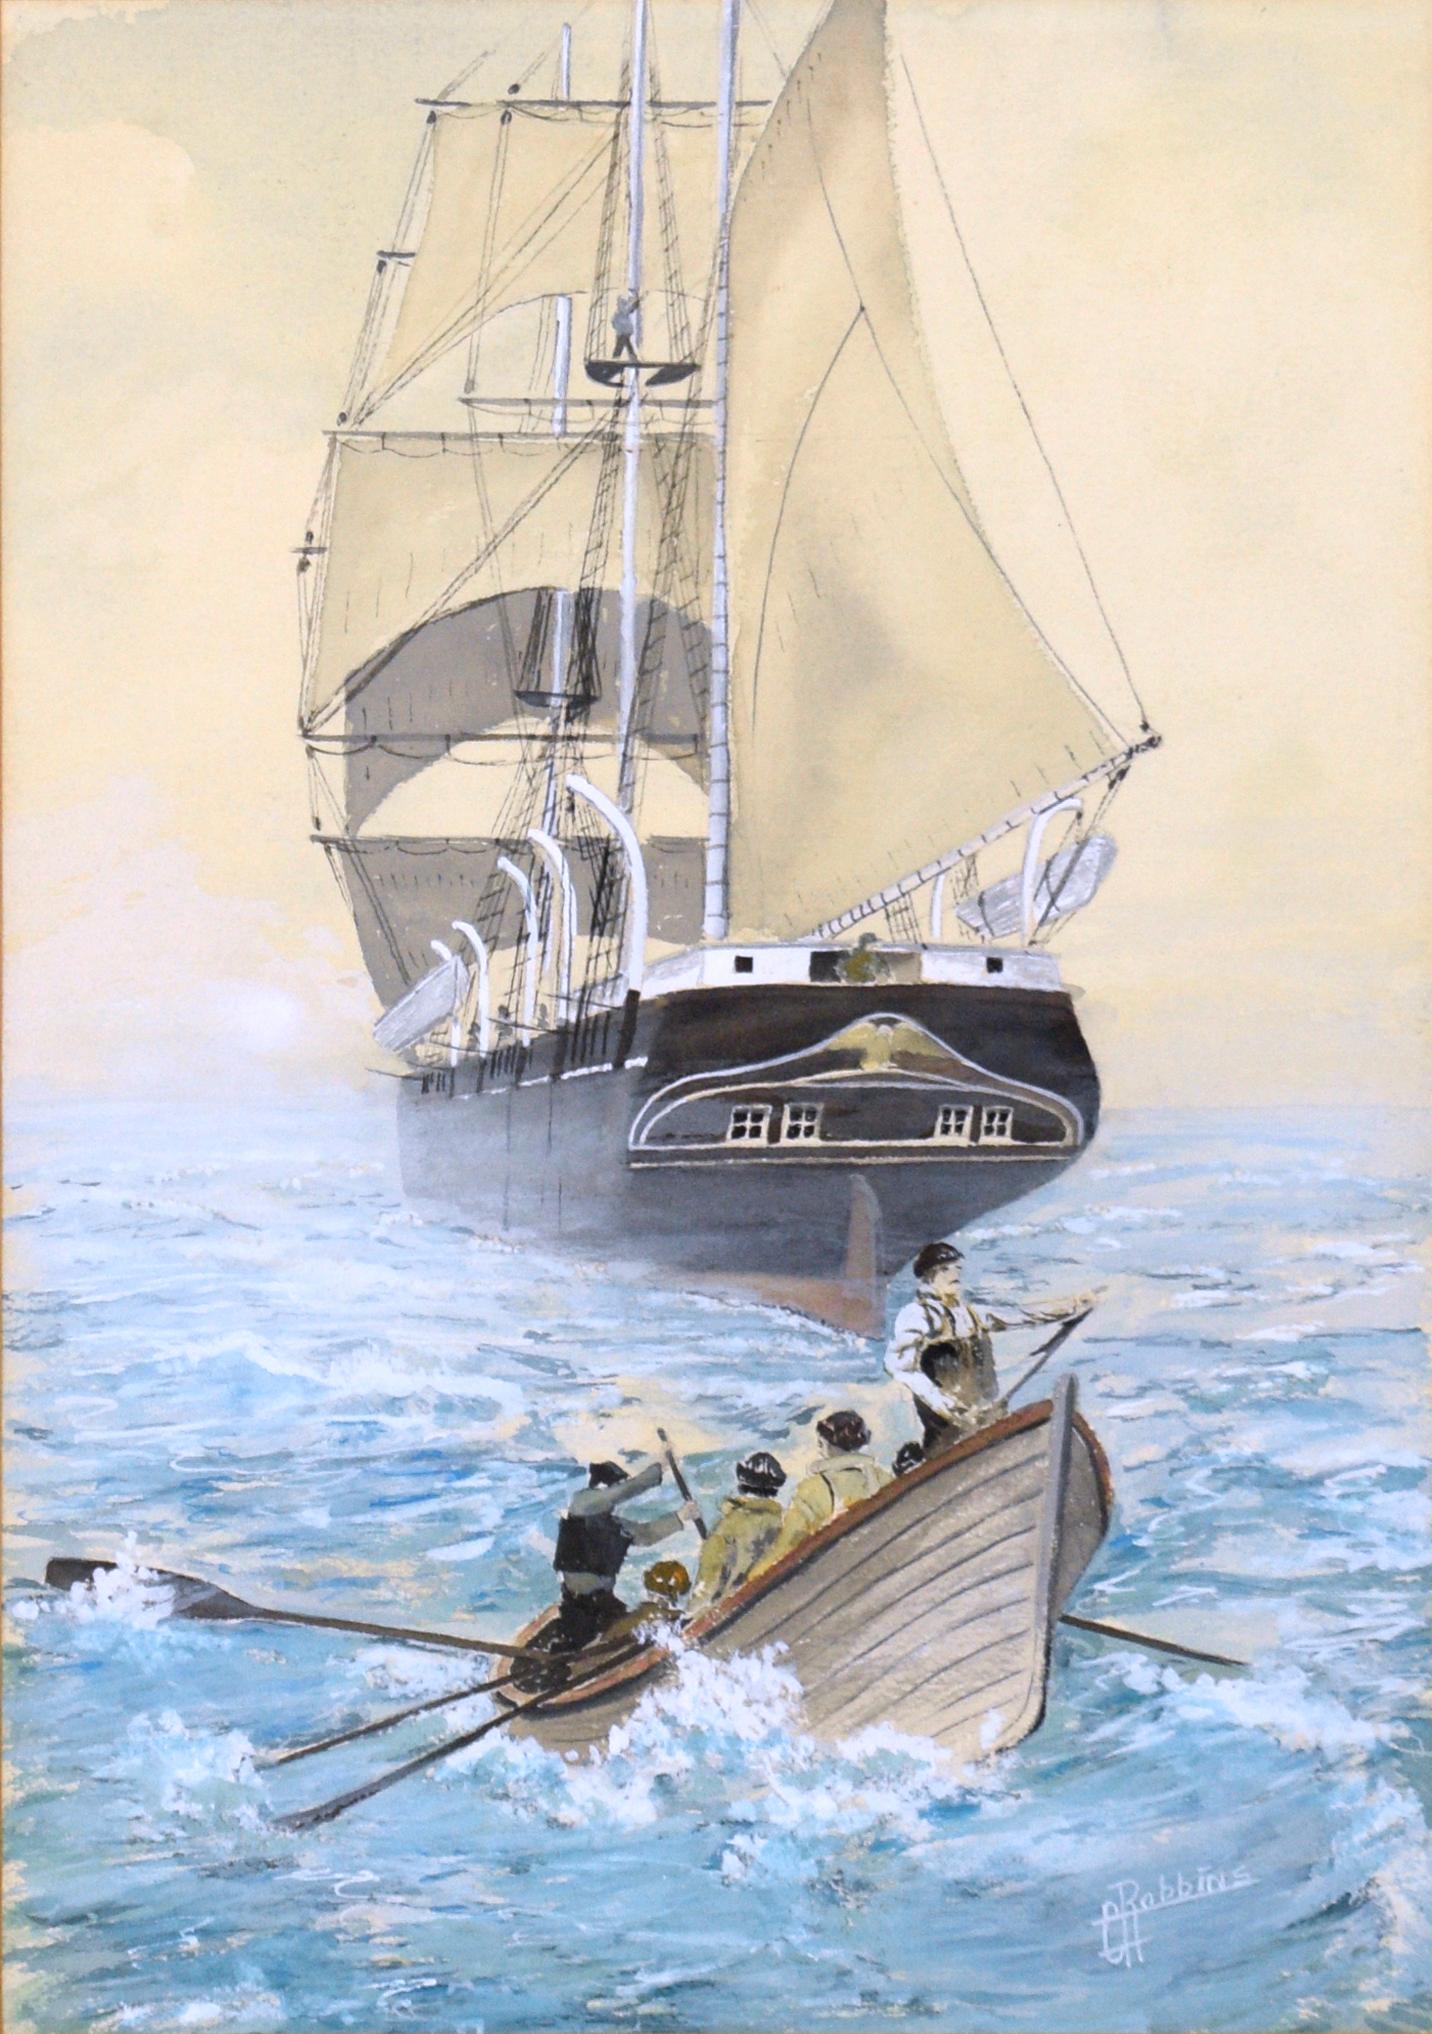 Rowing to Shore - Nautical Seascape in Gouache on Paper - Painting by George A. Robbins